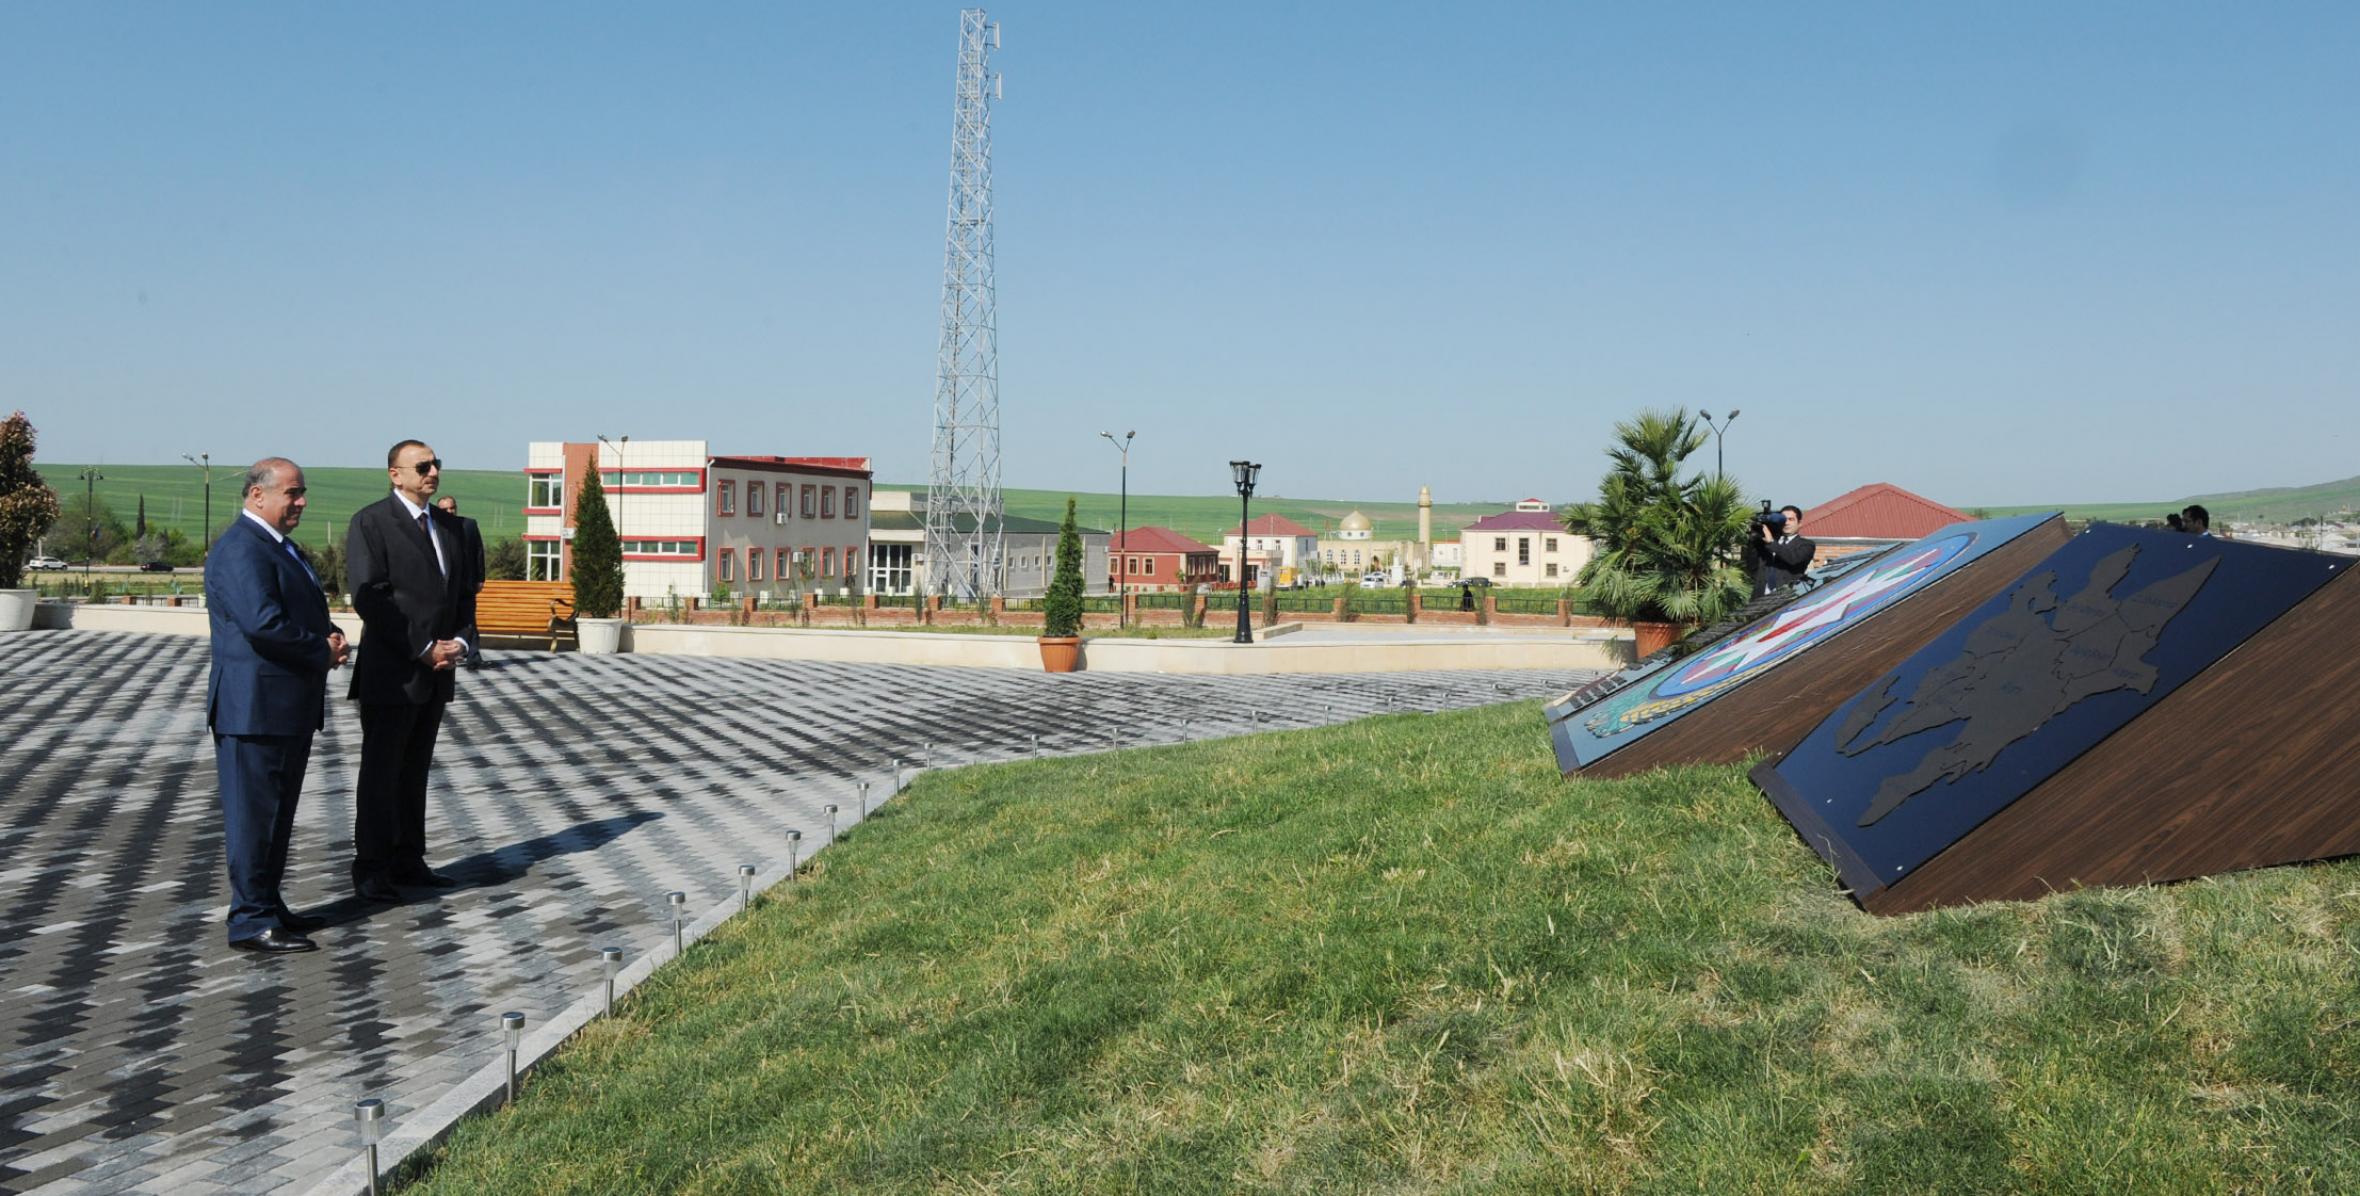 Ilham Aliyev reviewed the Flag Square in a park in the Gobustan district center